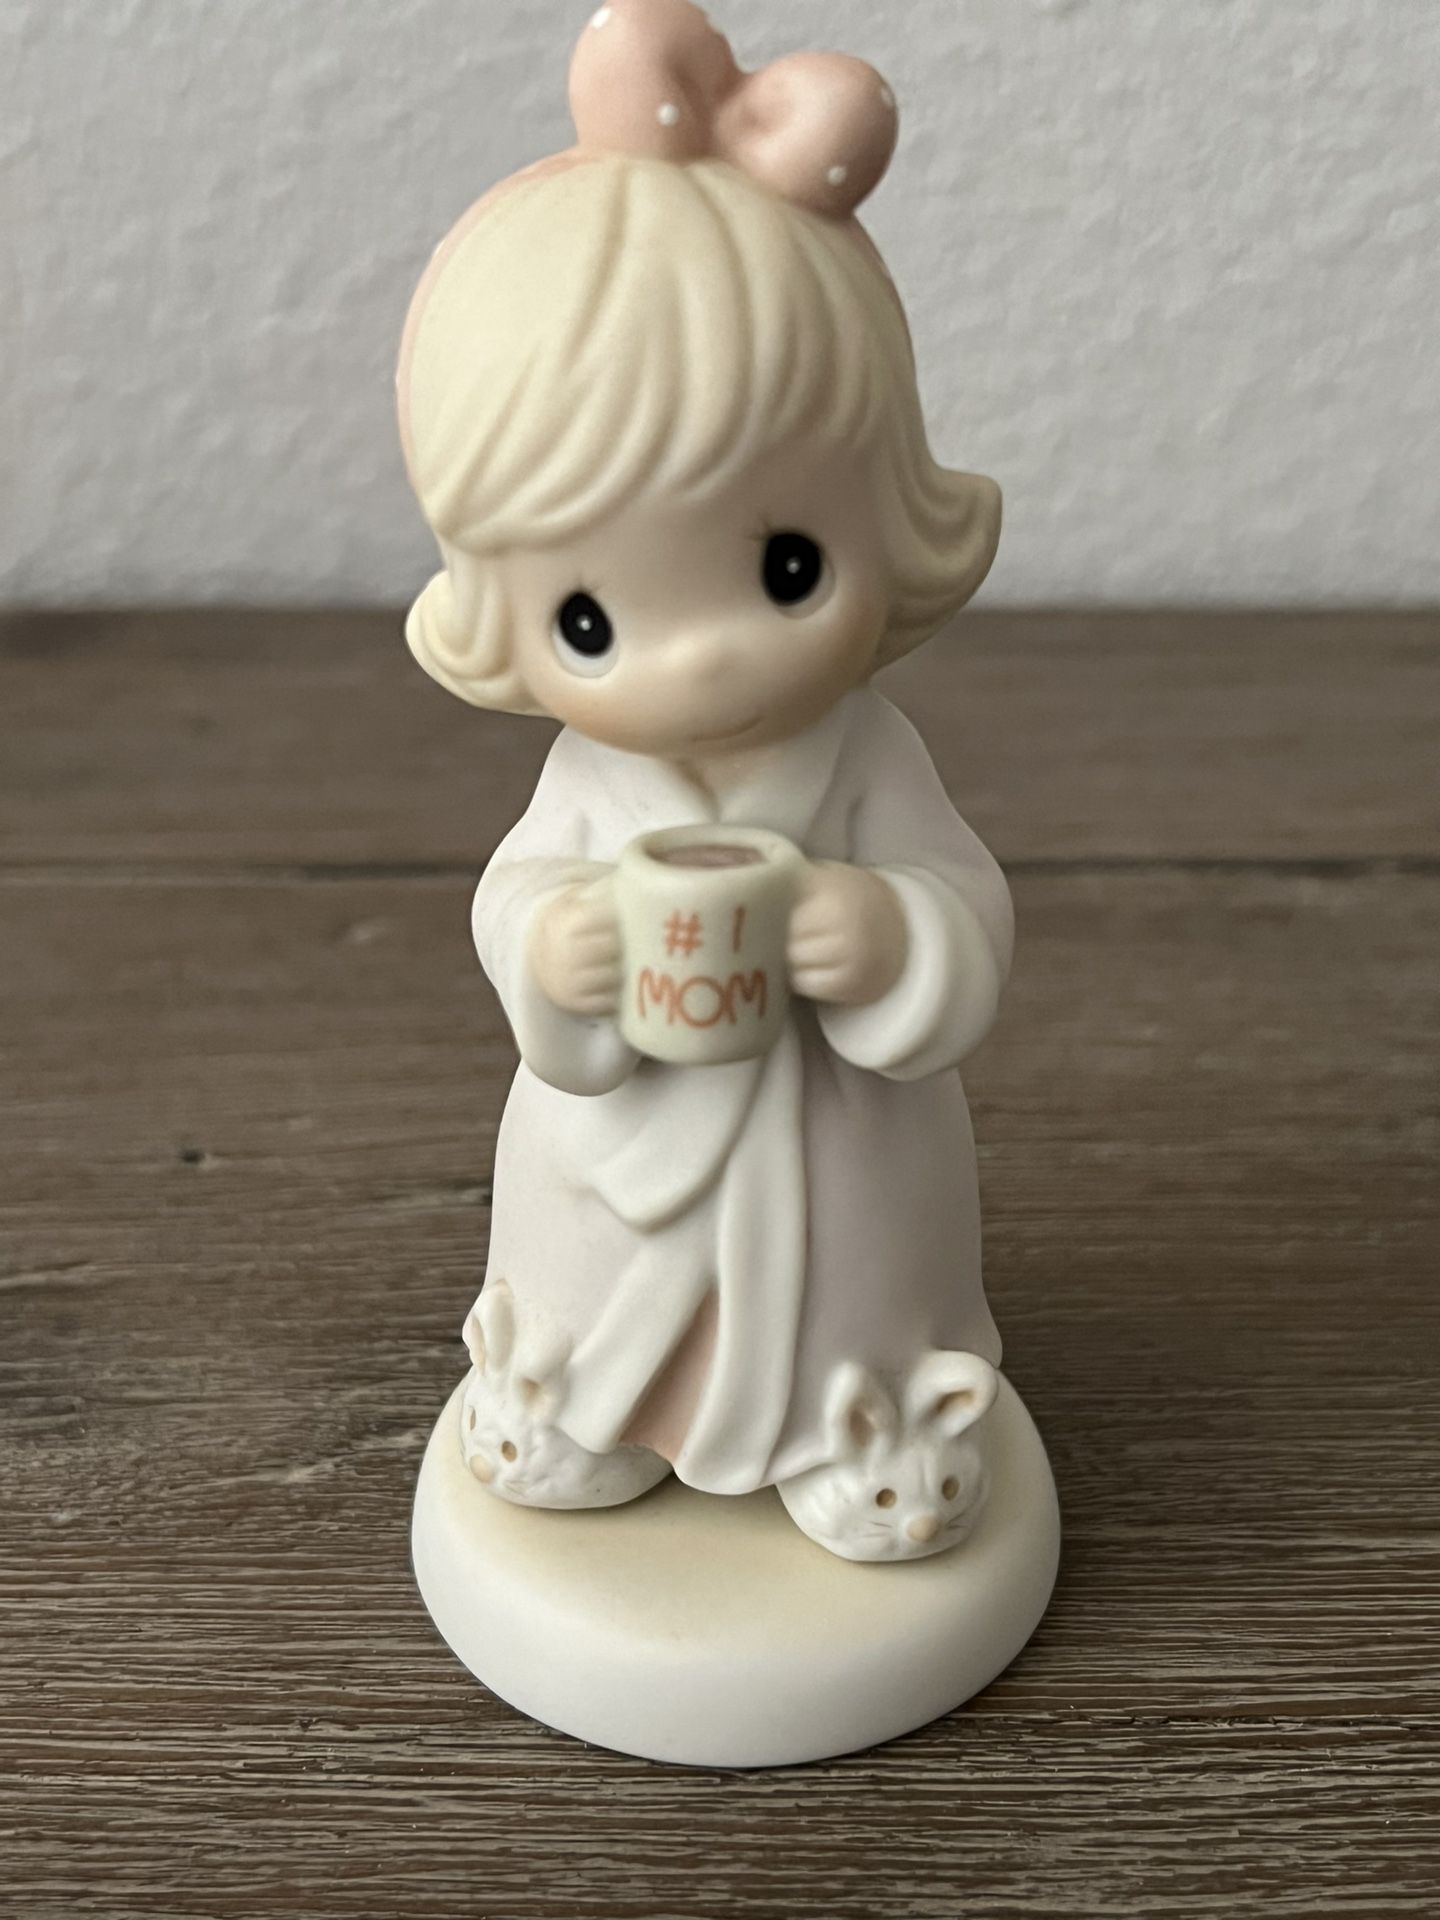 1997 Precious Moments #1 Mom “Thank You For The Times We Share” Figurine